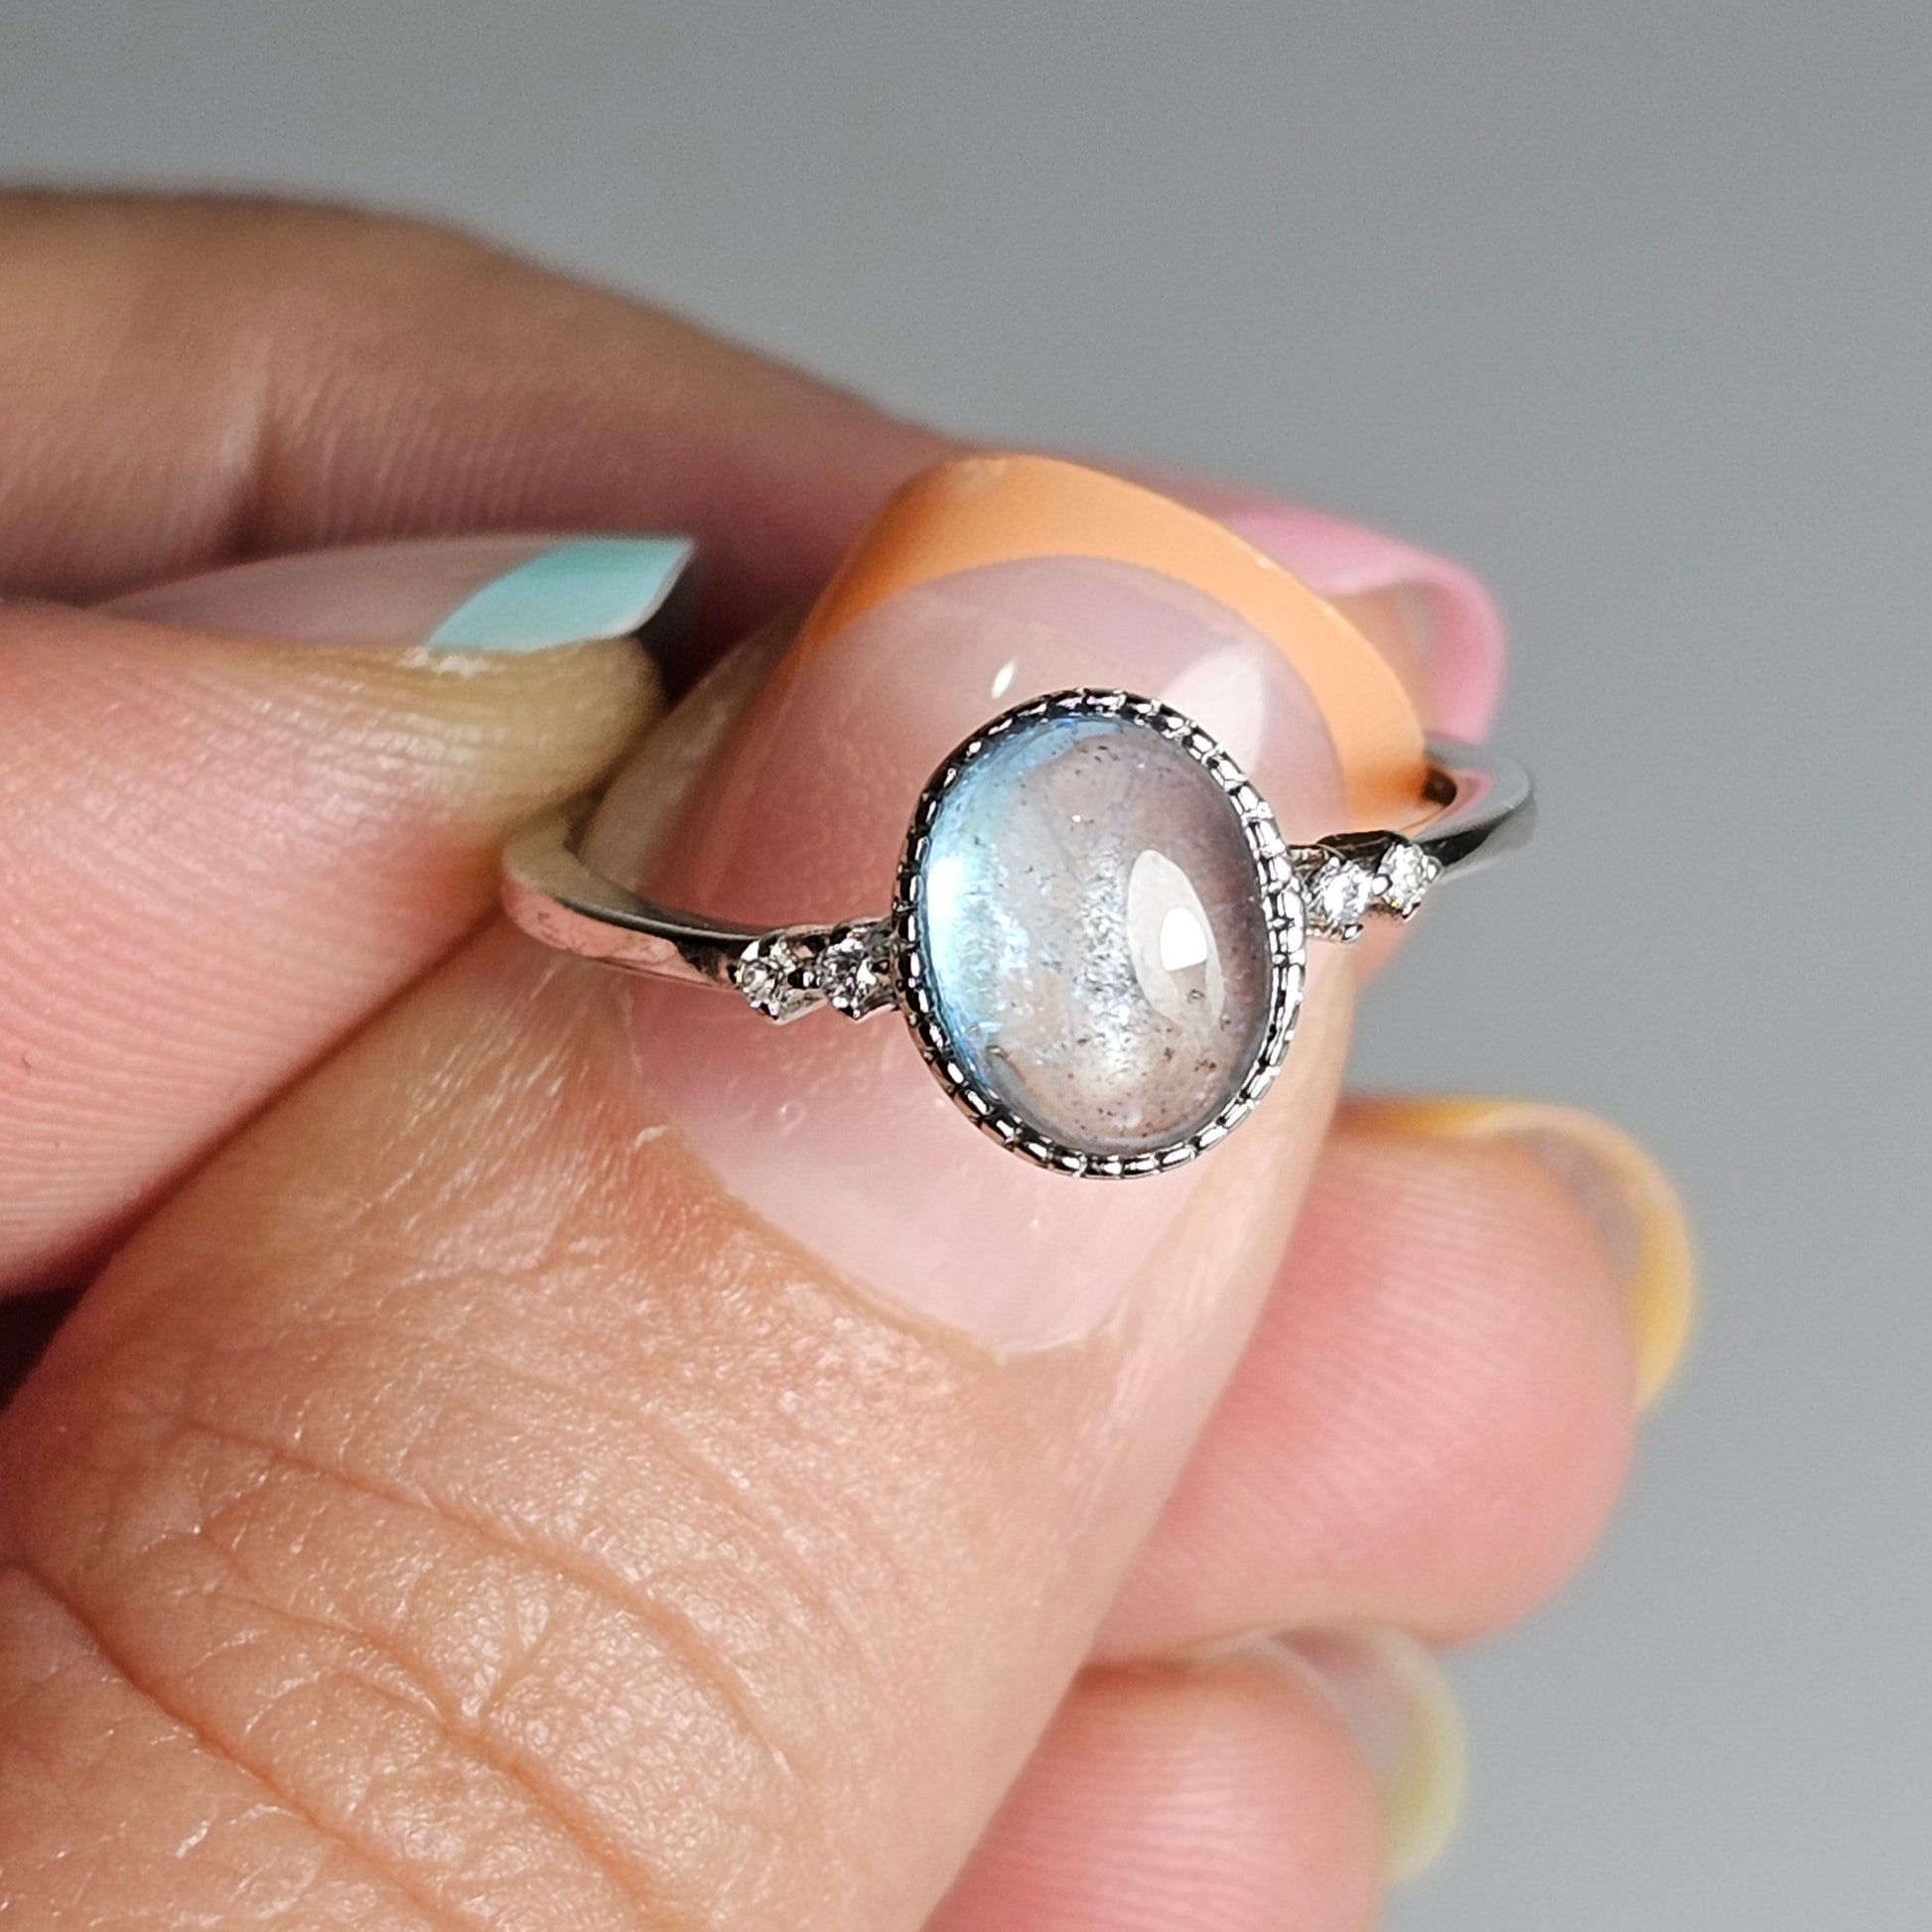 This adjustable ring is crafted from sterling silver and features a gorgeous oval Aquamarine with a Zircon accented shoulder ring band.